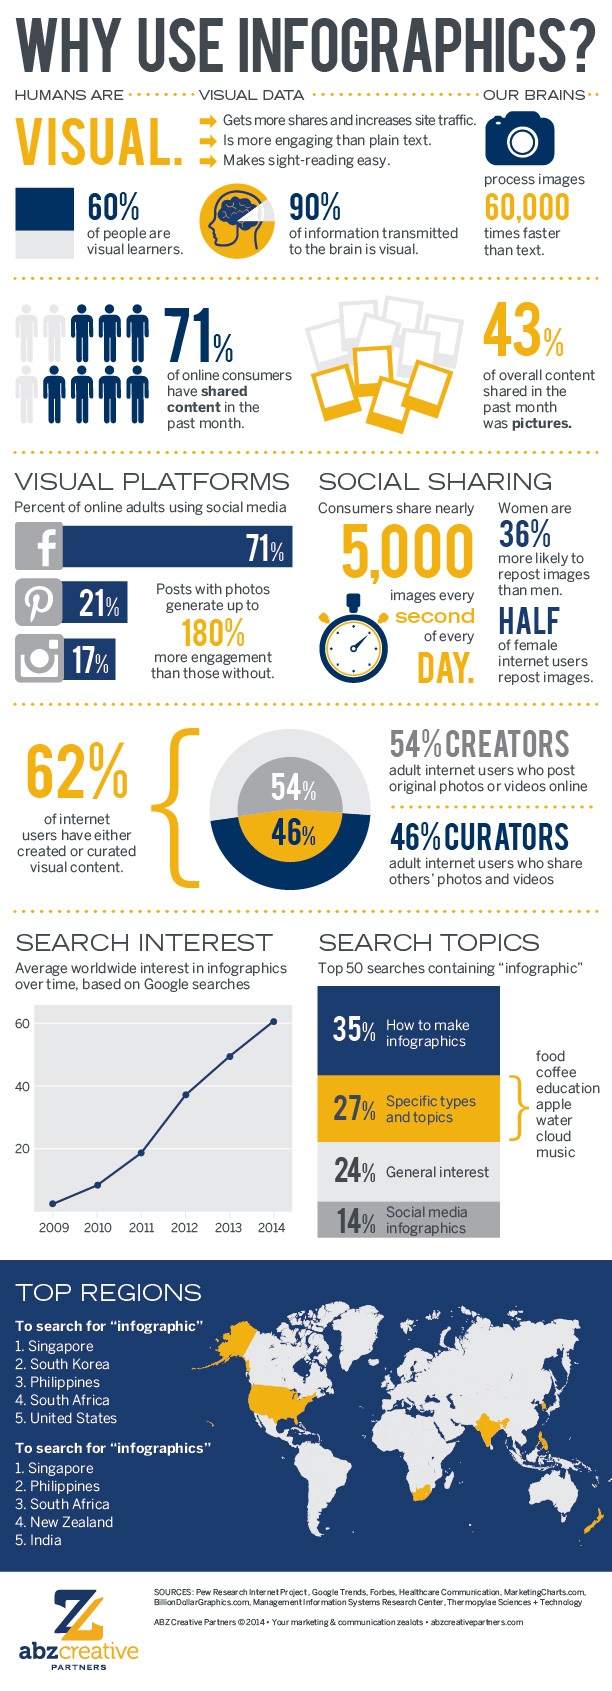 Infographic about infographics 2014 - The Power of Infographics